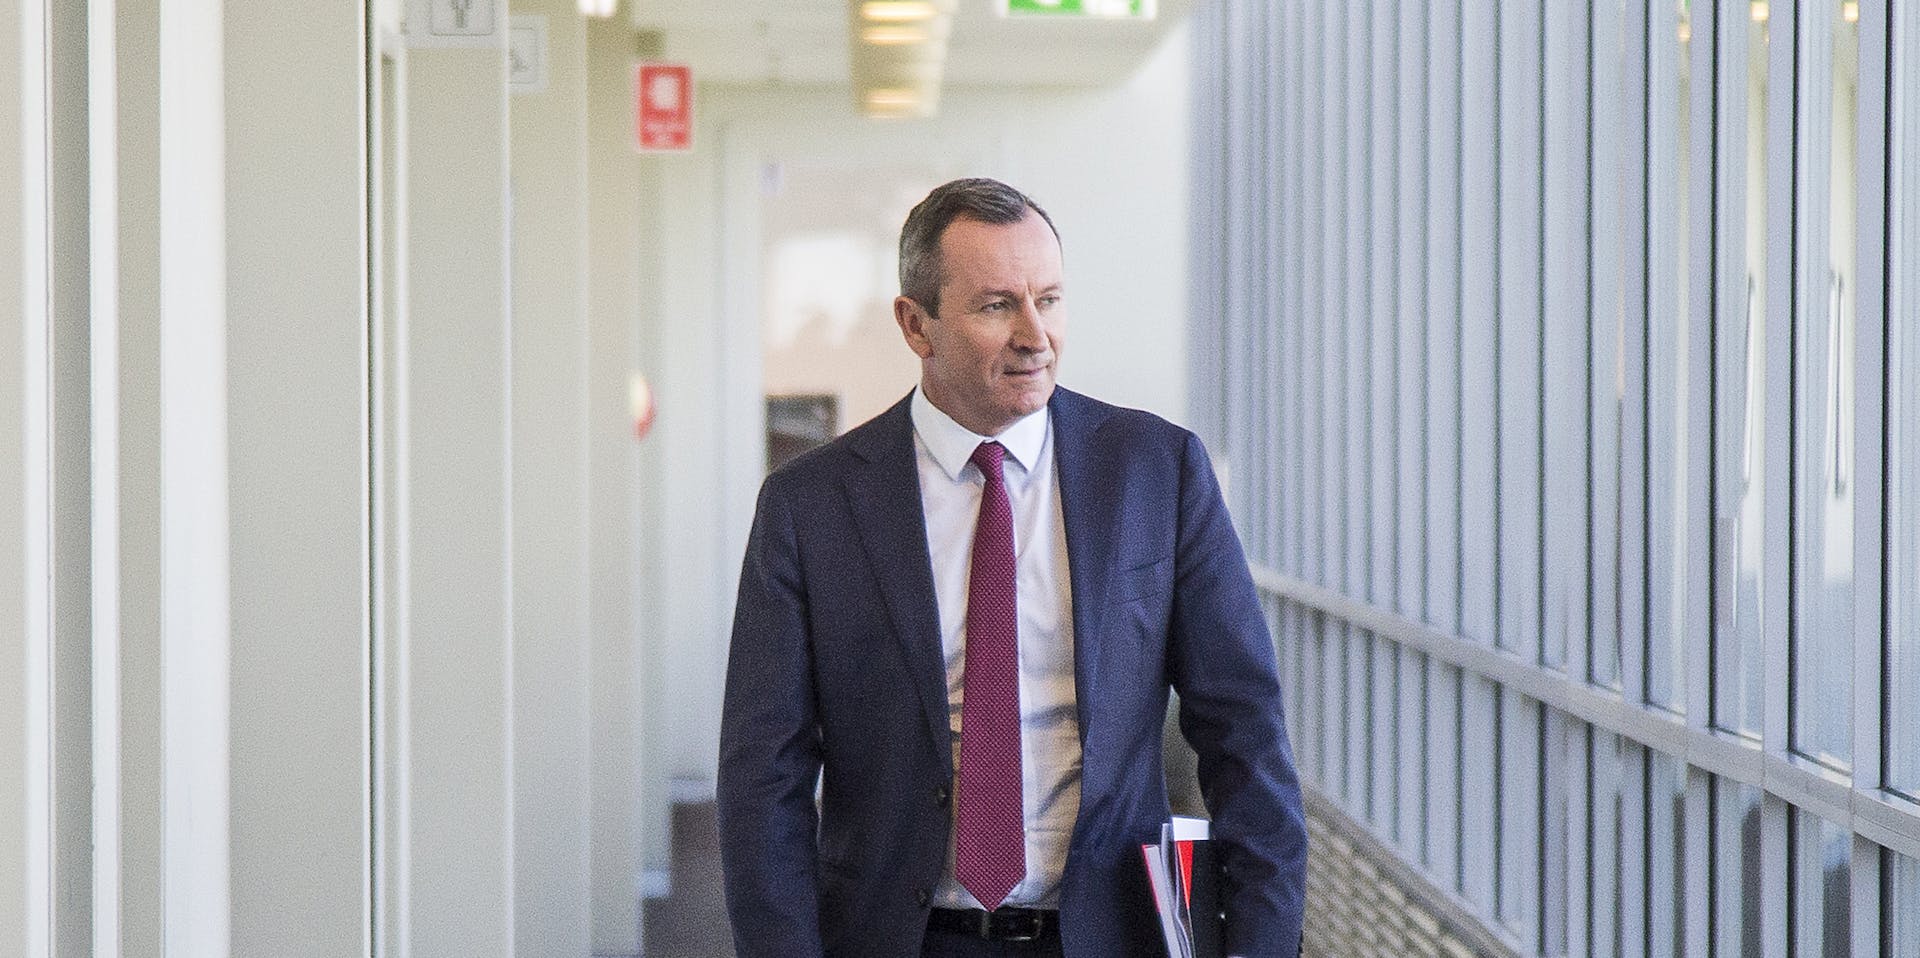 WA Premier Mark McGowan quits in shock announcement, declaring he is 'exhausted'